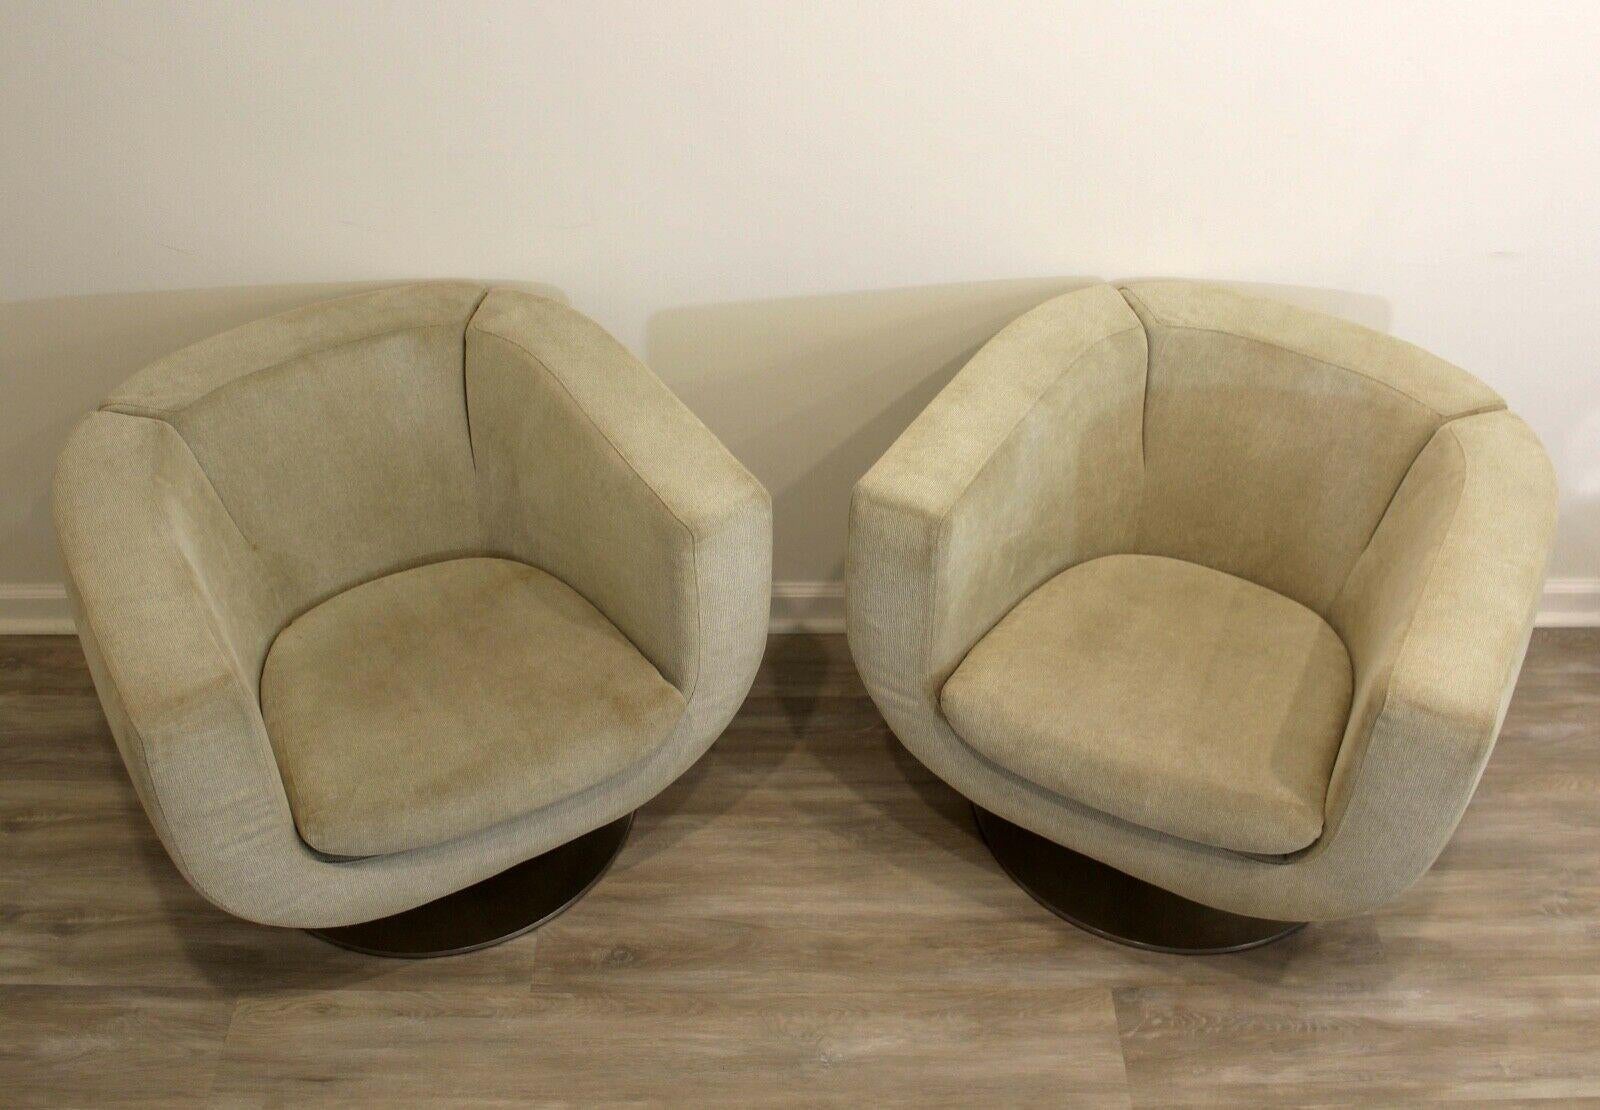 This pair of contemporary tulip armchairs are from B&B Italia, known worldwide for their amazing modern and contemporary furnishings as well as their high standards of quality. The 'egg' chair seating is upholstered in a neutral, creme fabric while